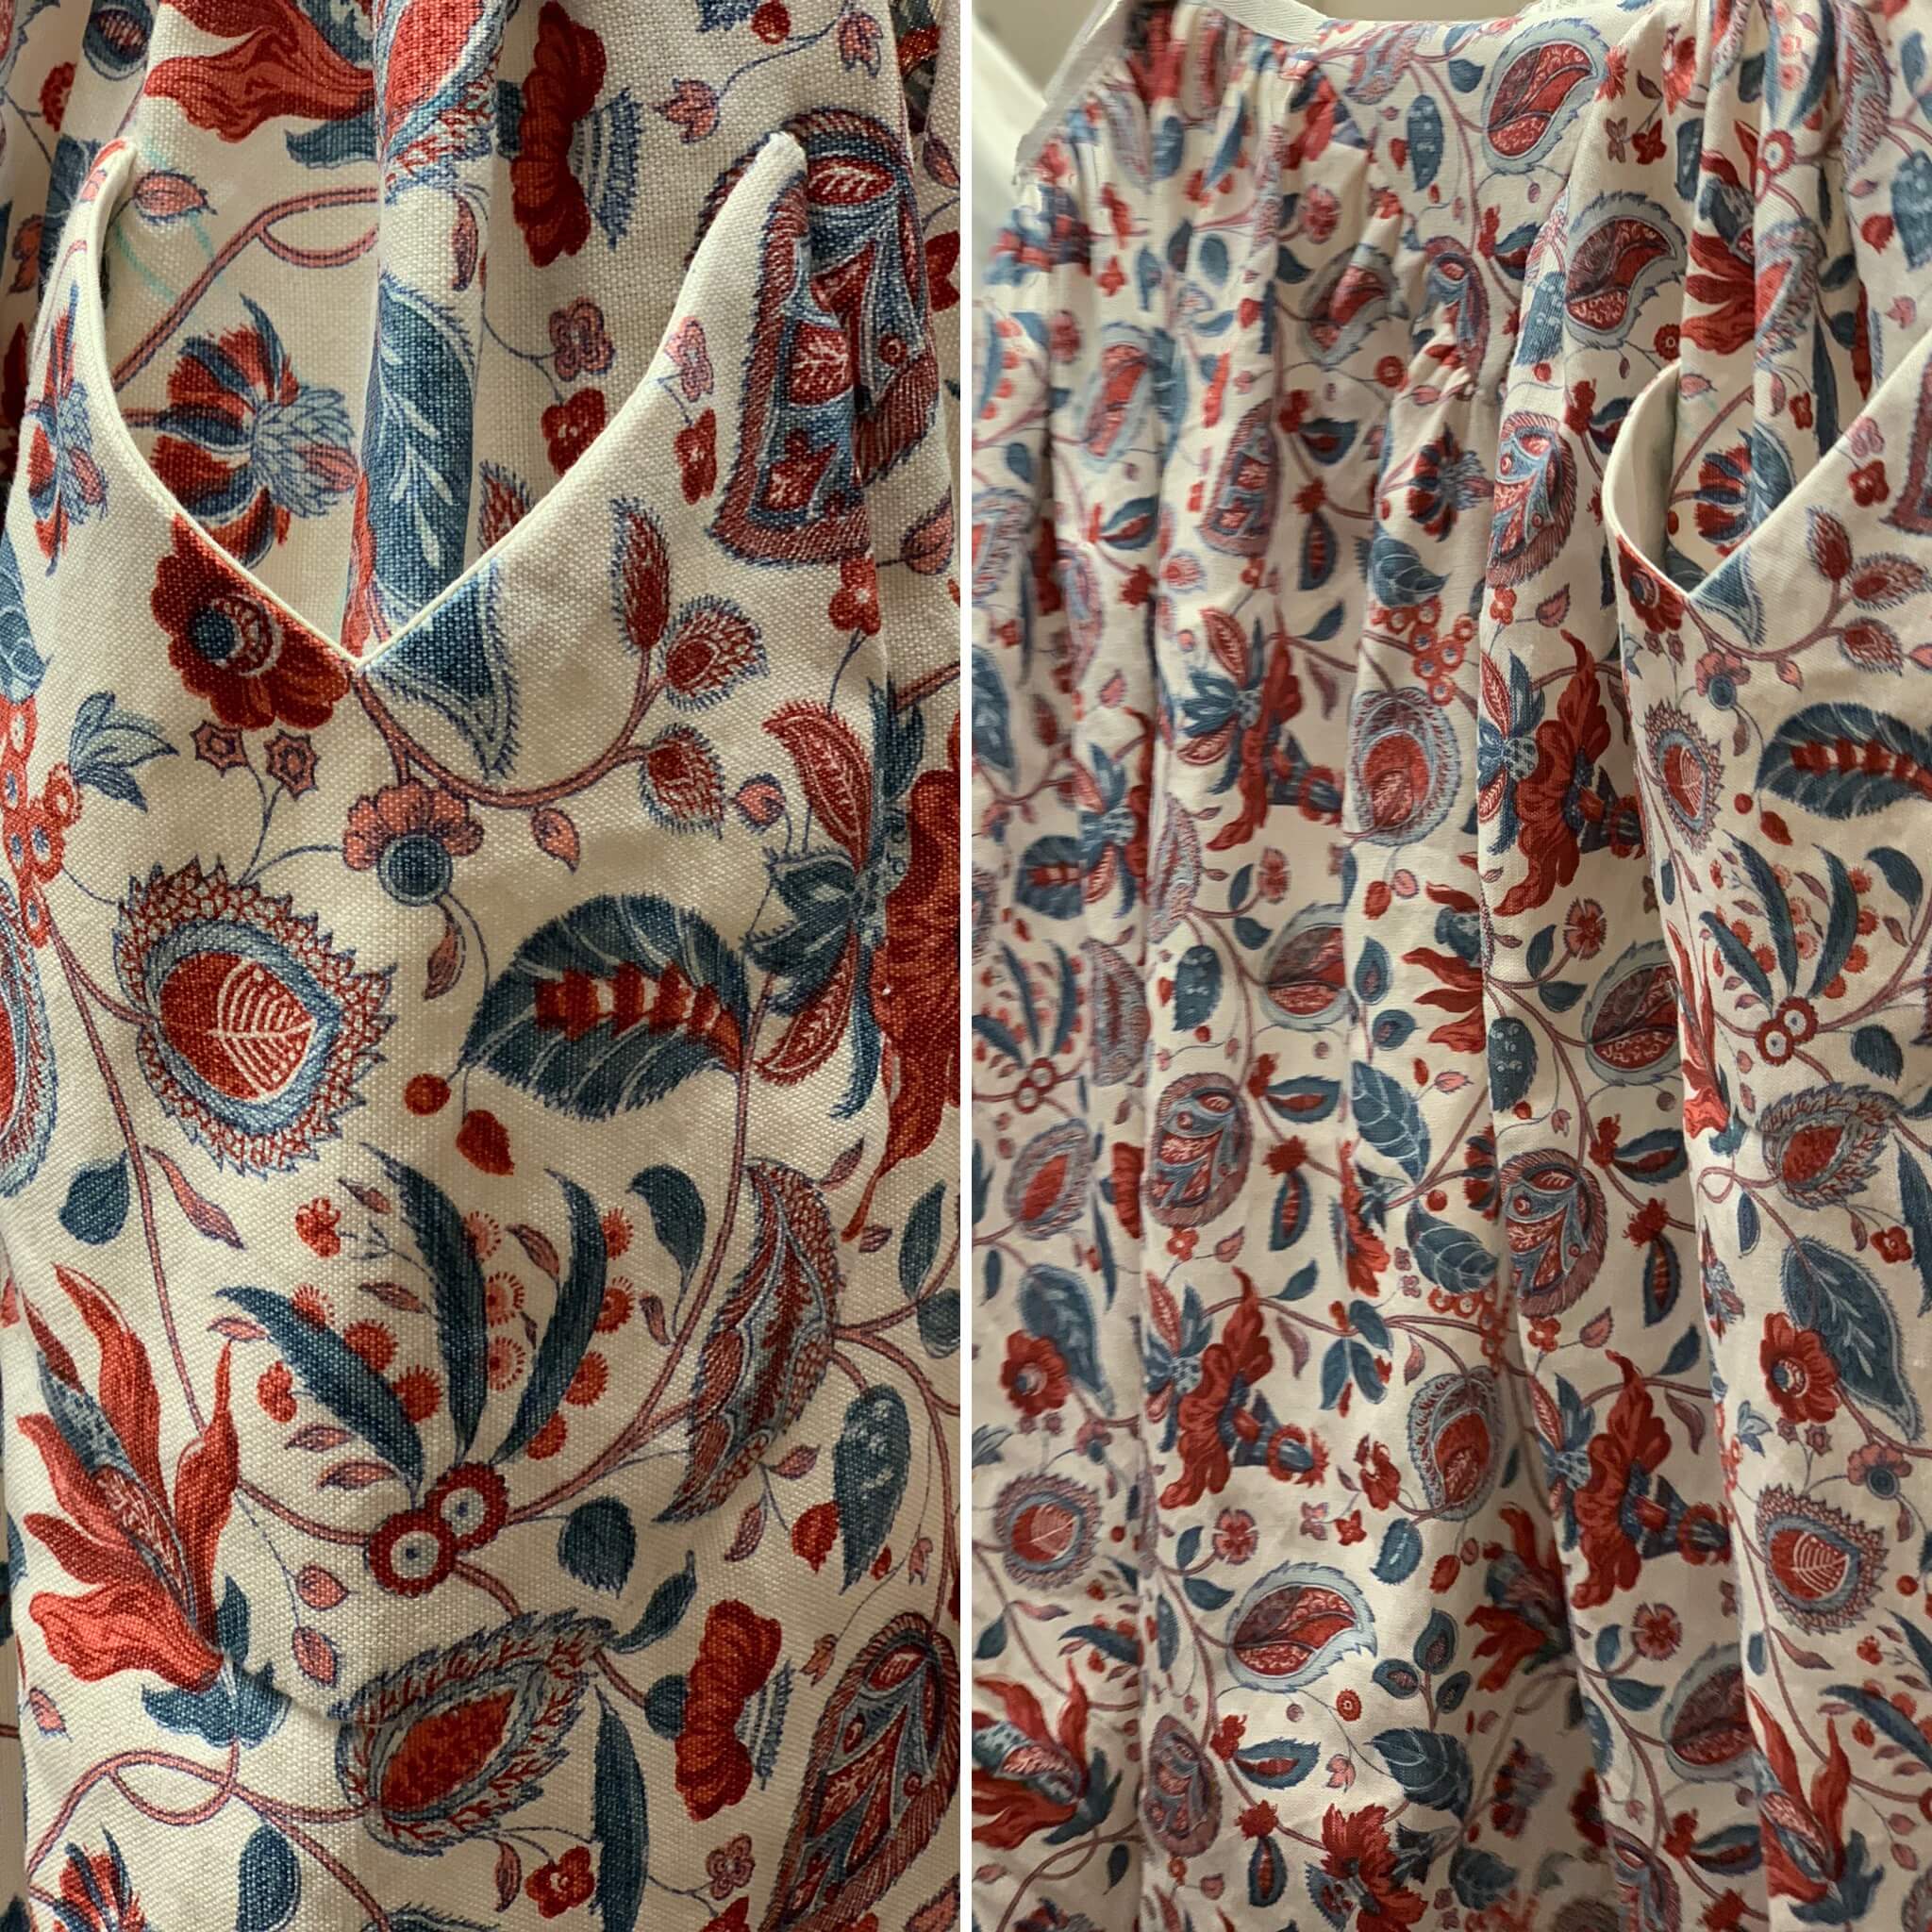 A close-up (left) and Susanna’s apron (right) showing the addition of a hidden pocket.